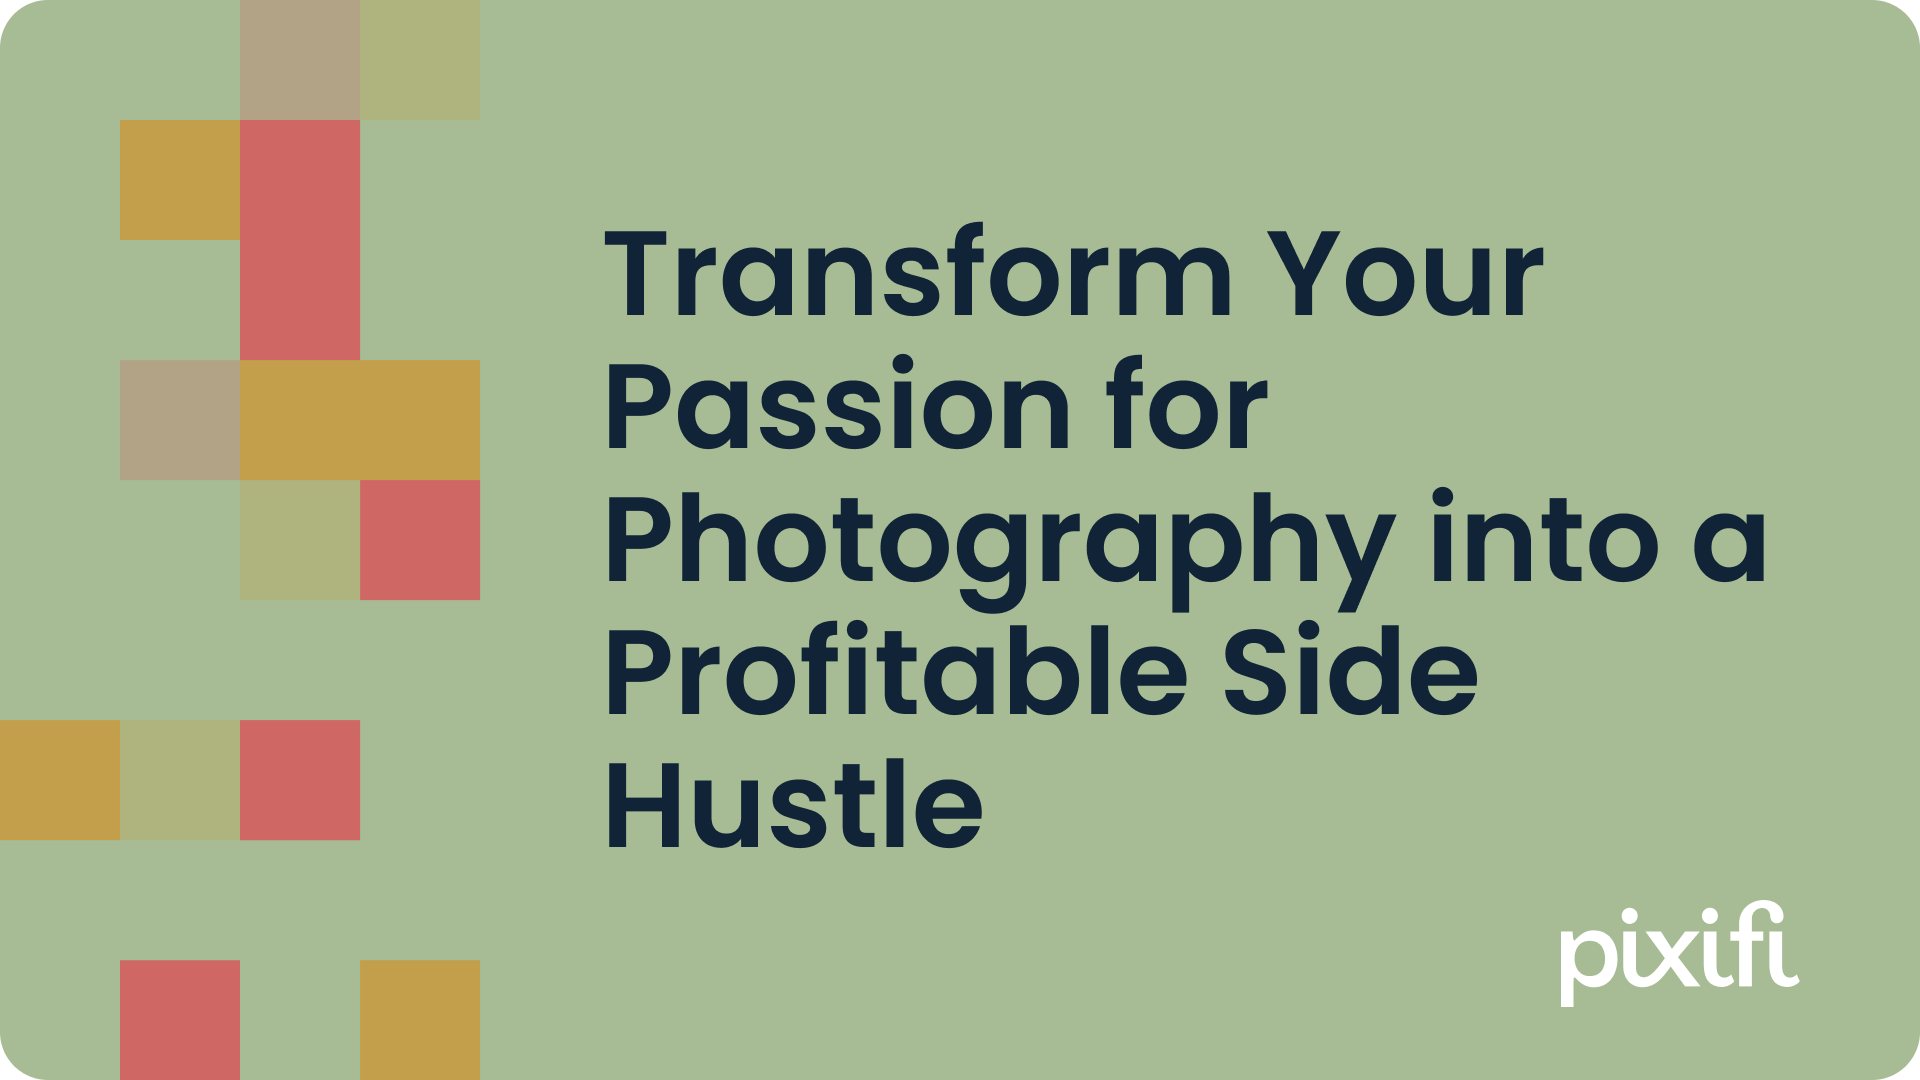 Transform Your Passion for Photography into a Profitable Side Hustle